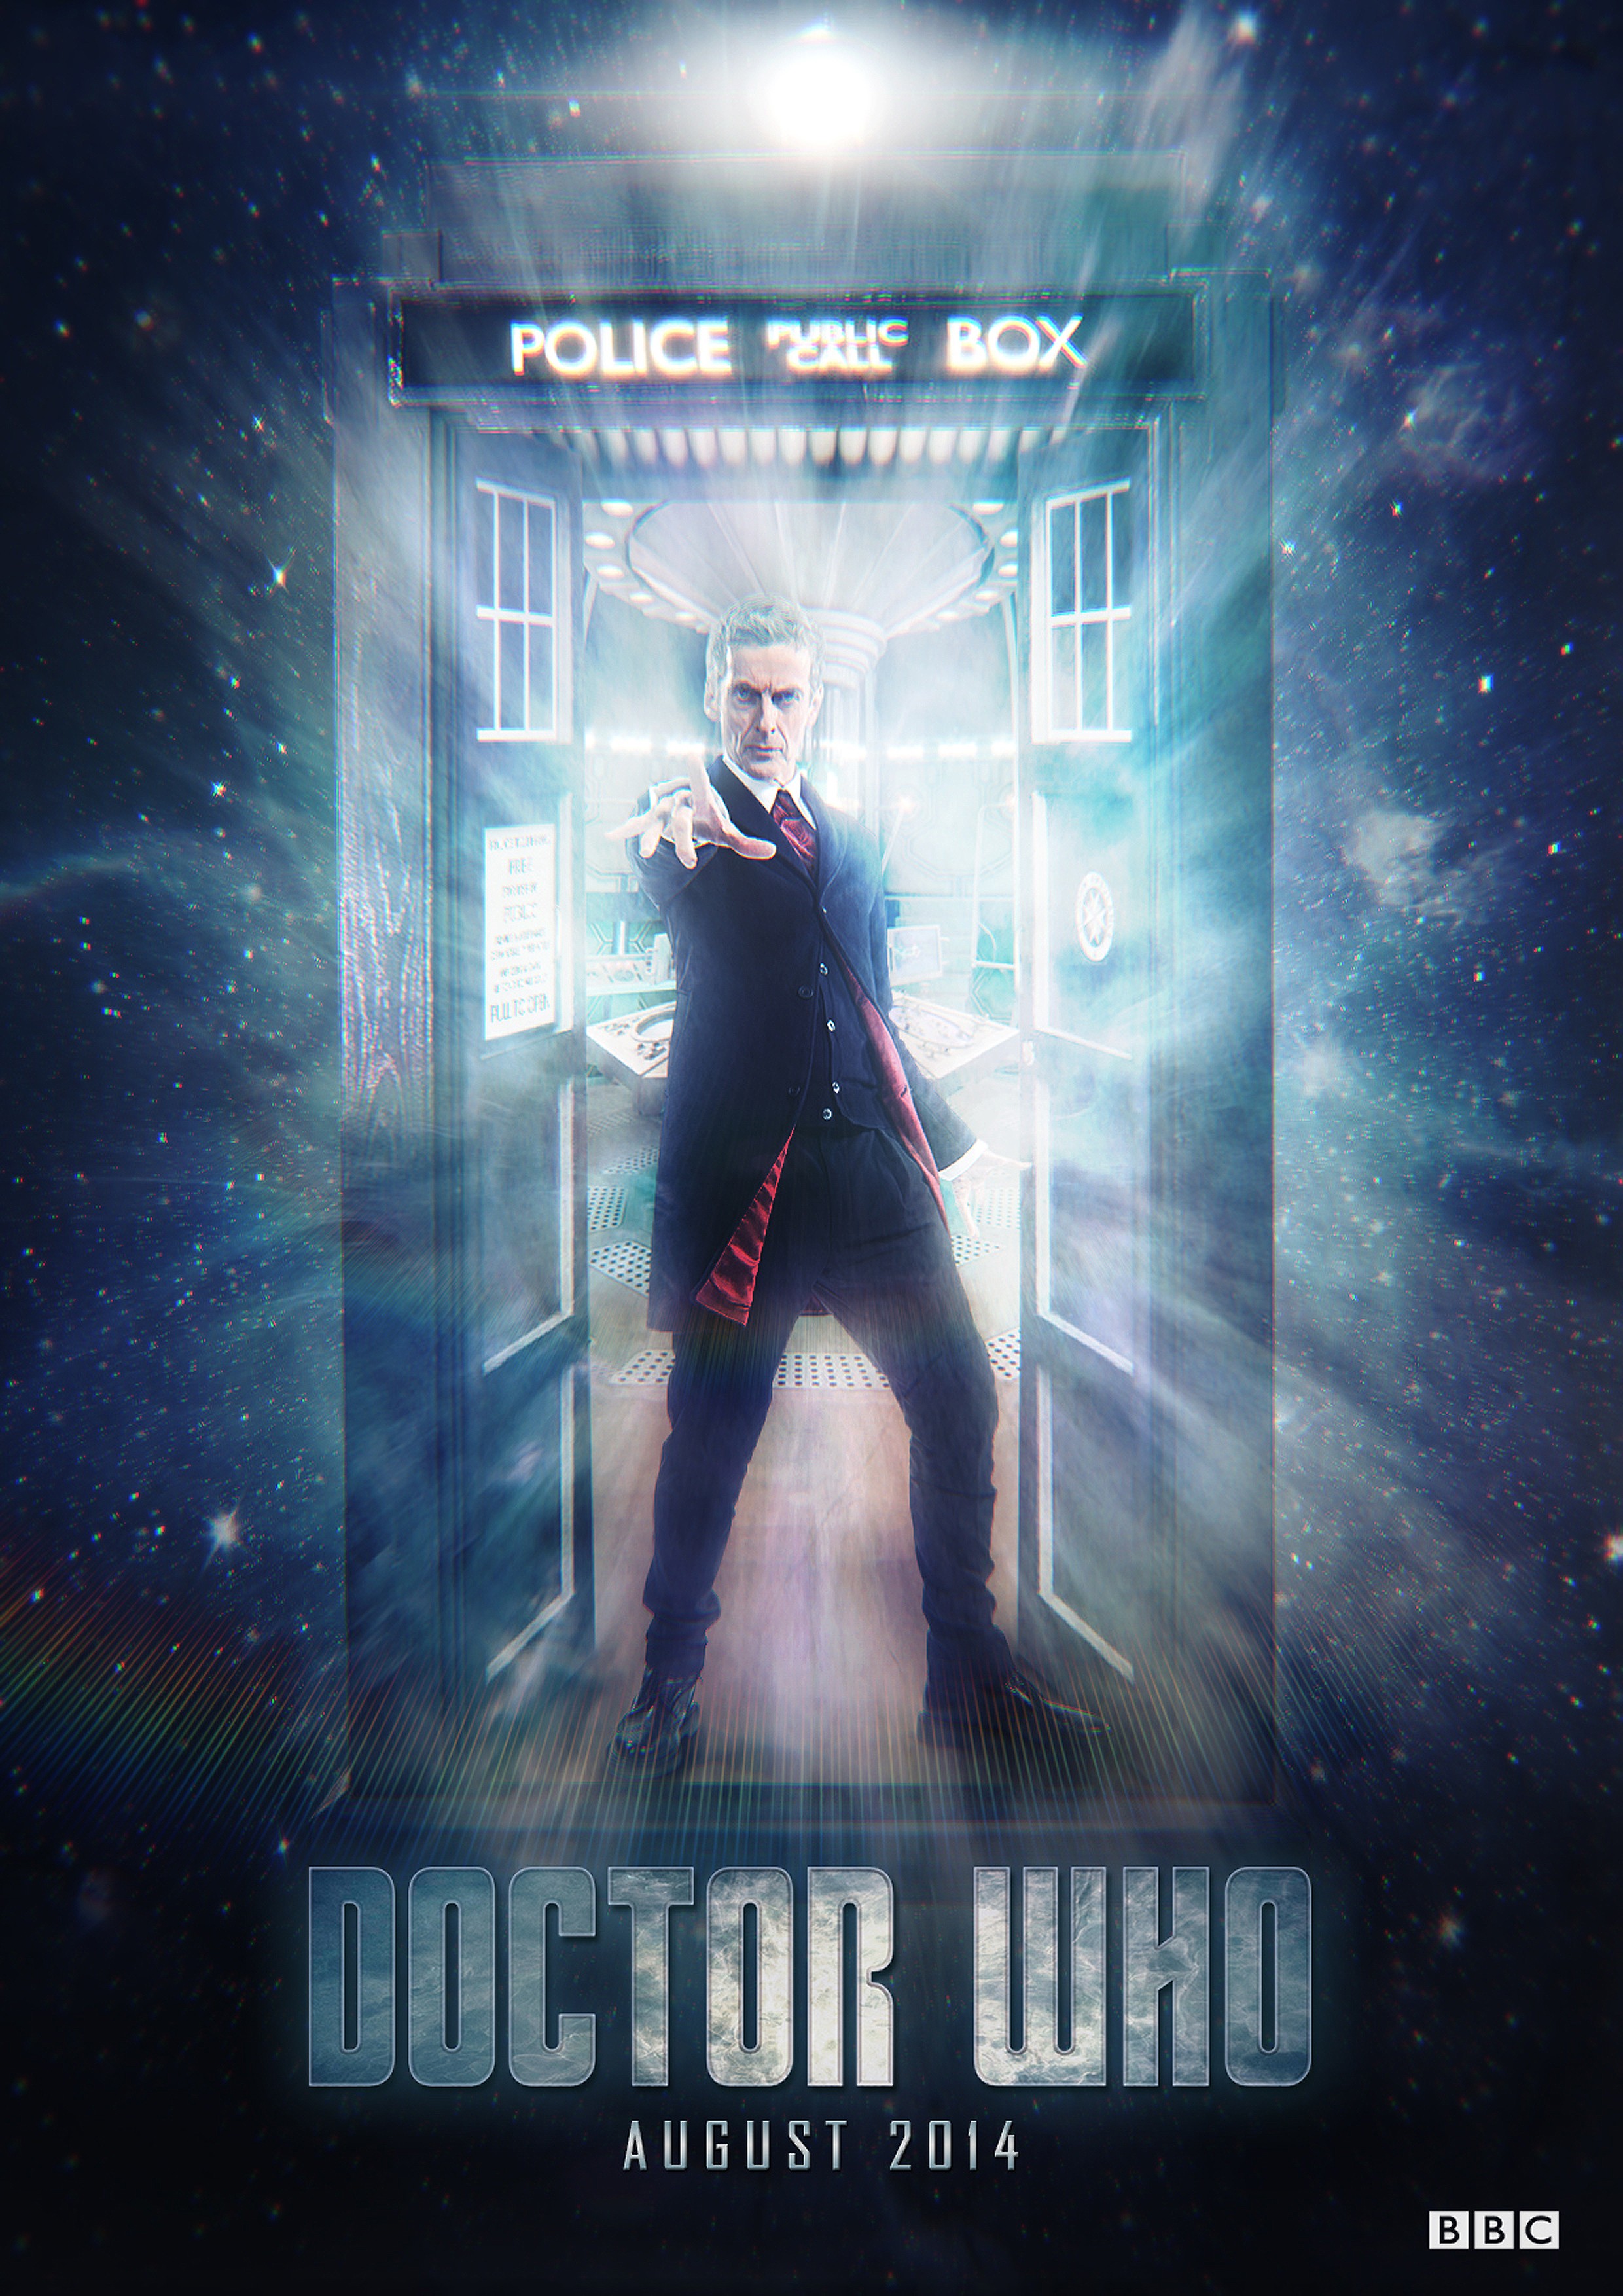 General 2480x3508 Doctor Who The Doctor Peter Capaldi TARDIS TV series science fiction men actor 2014 (Year) BBC